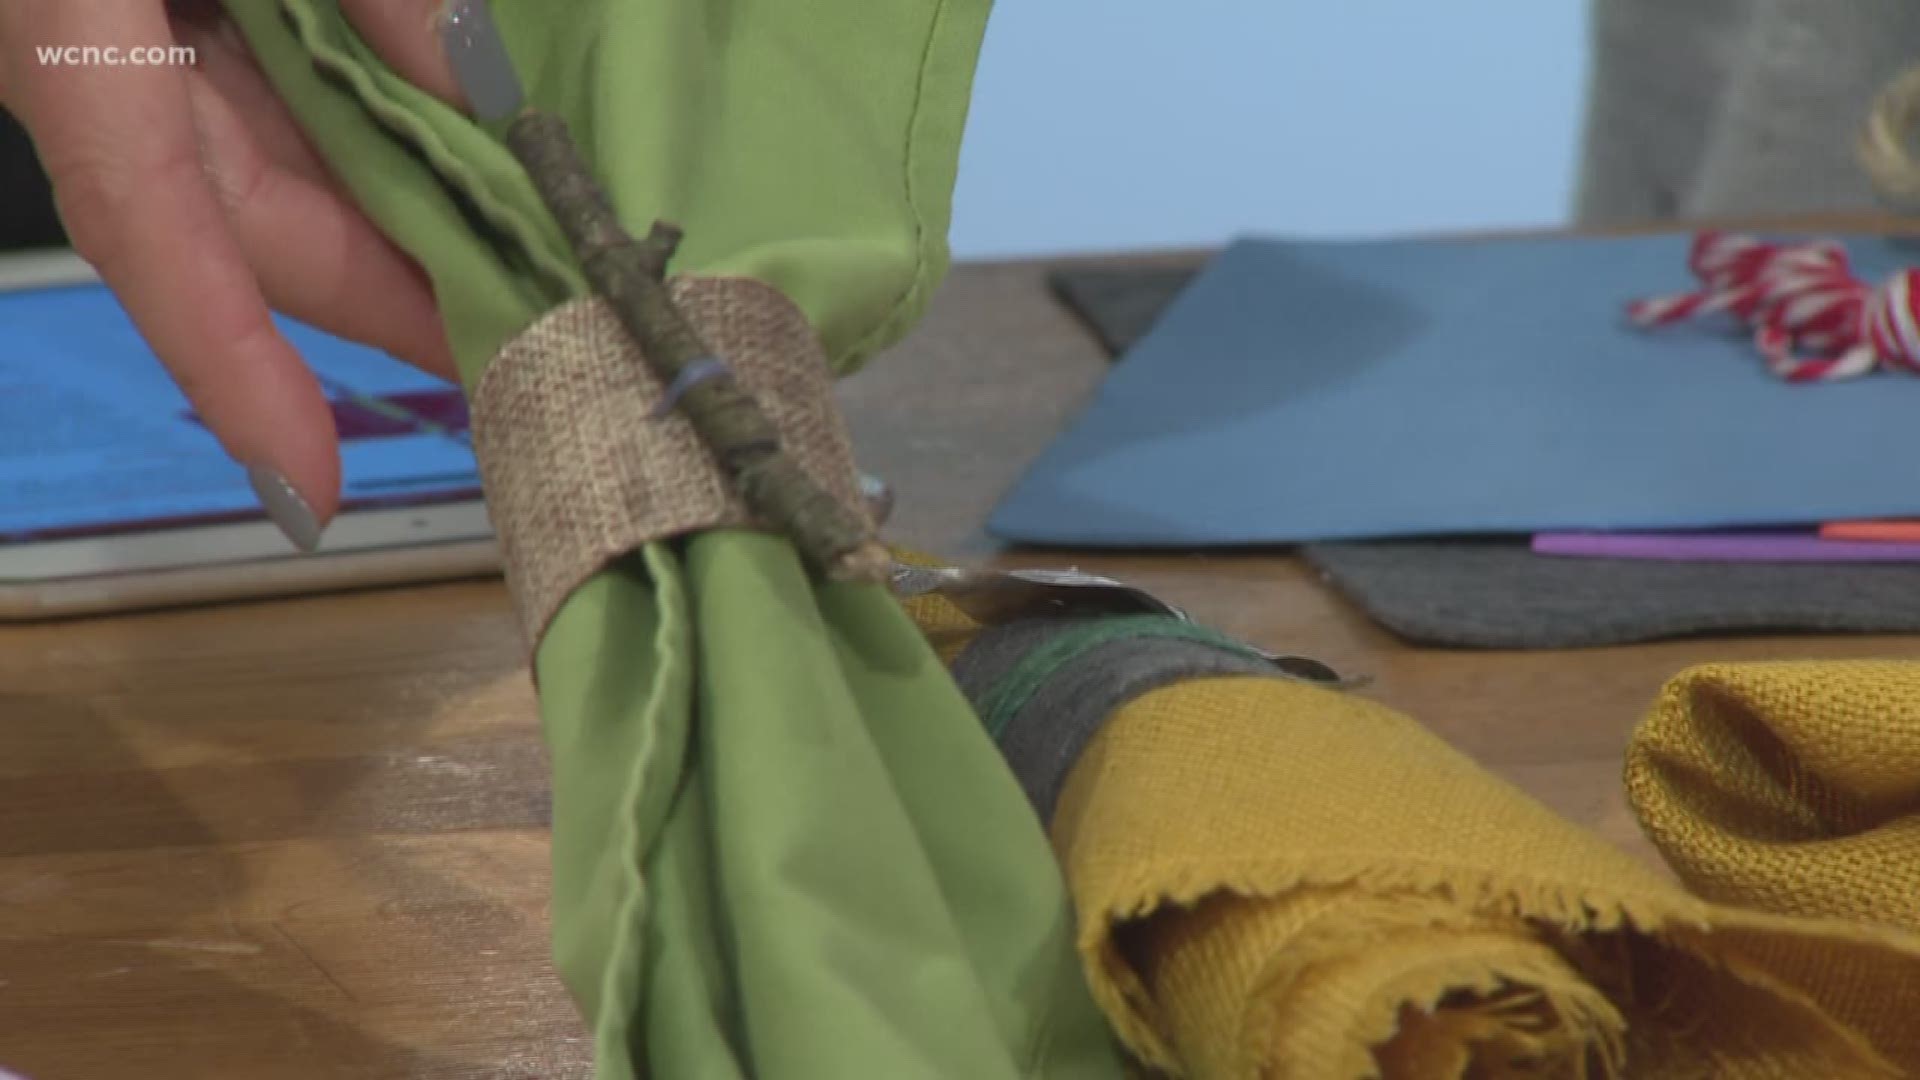 Laurie Smithwick shows you how to make napkin rings